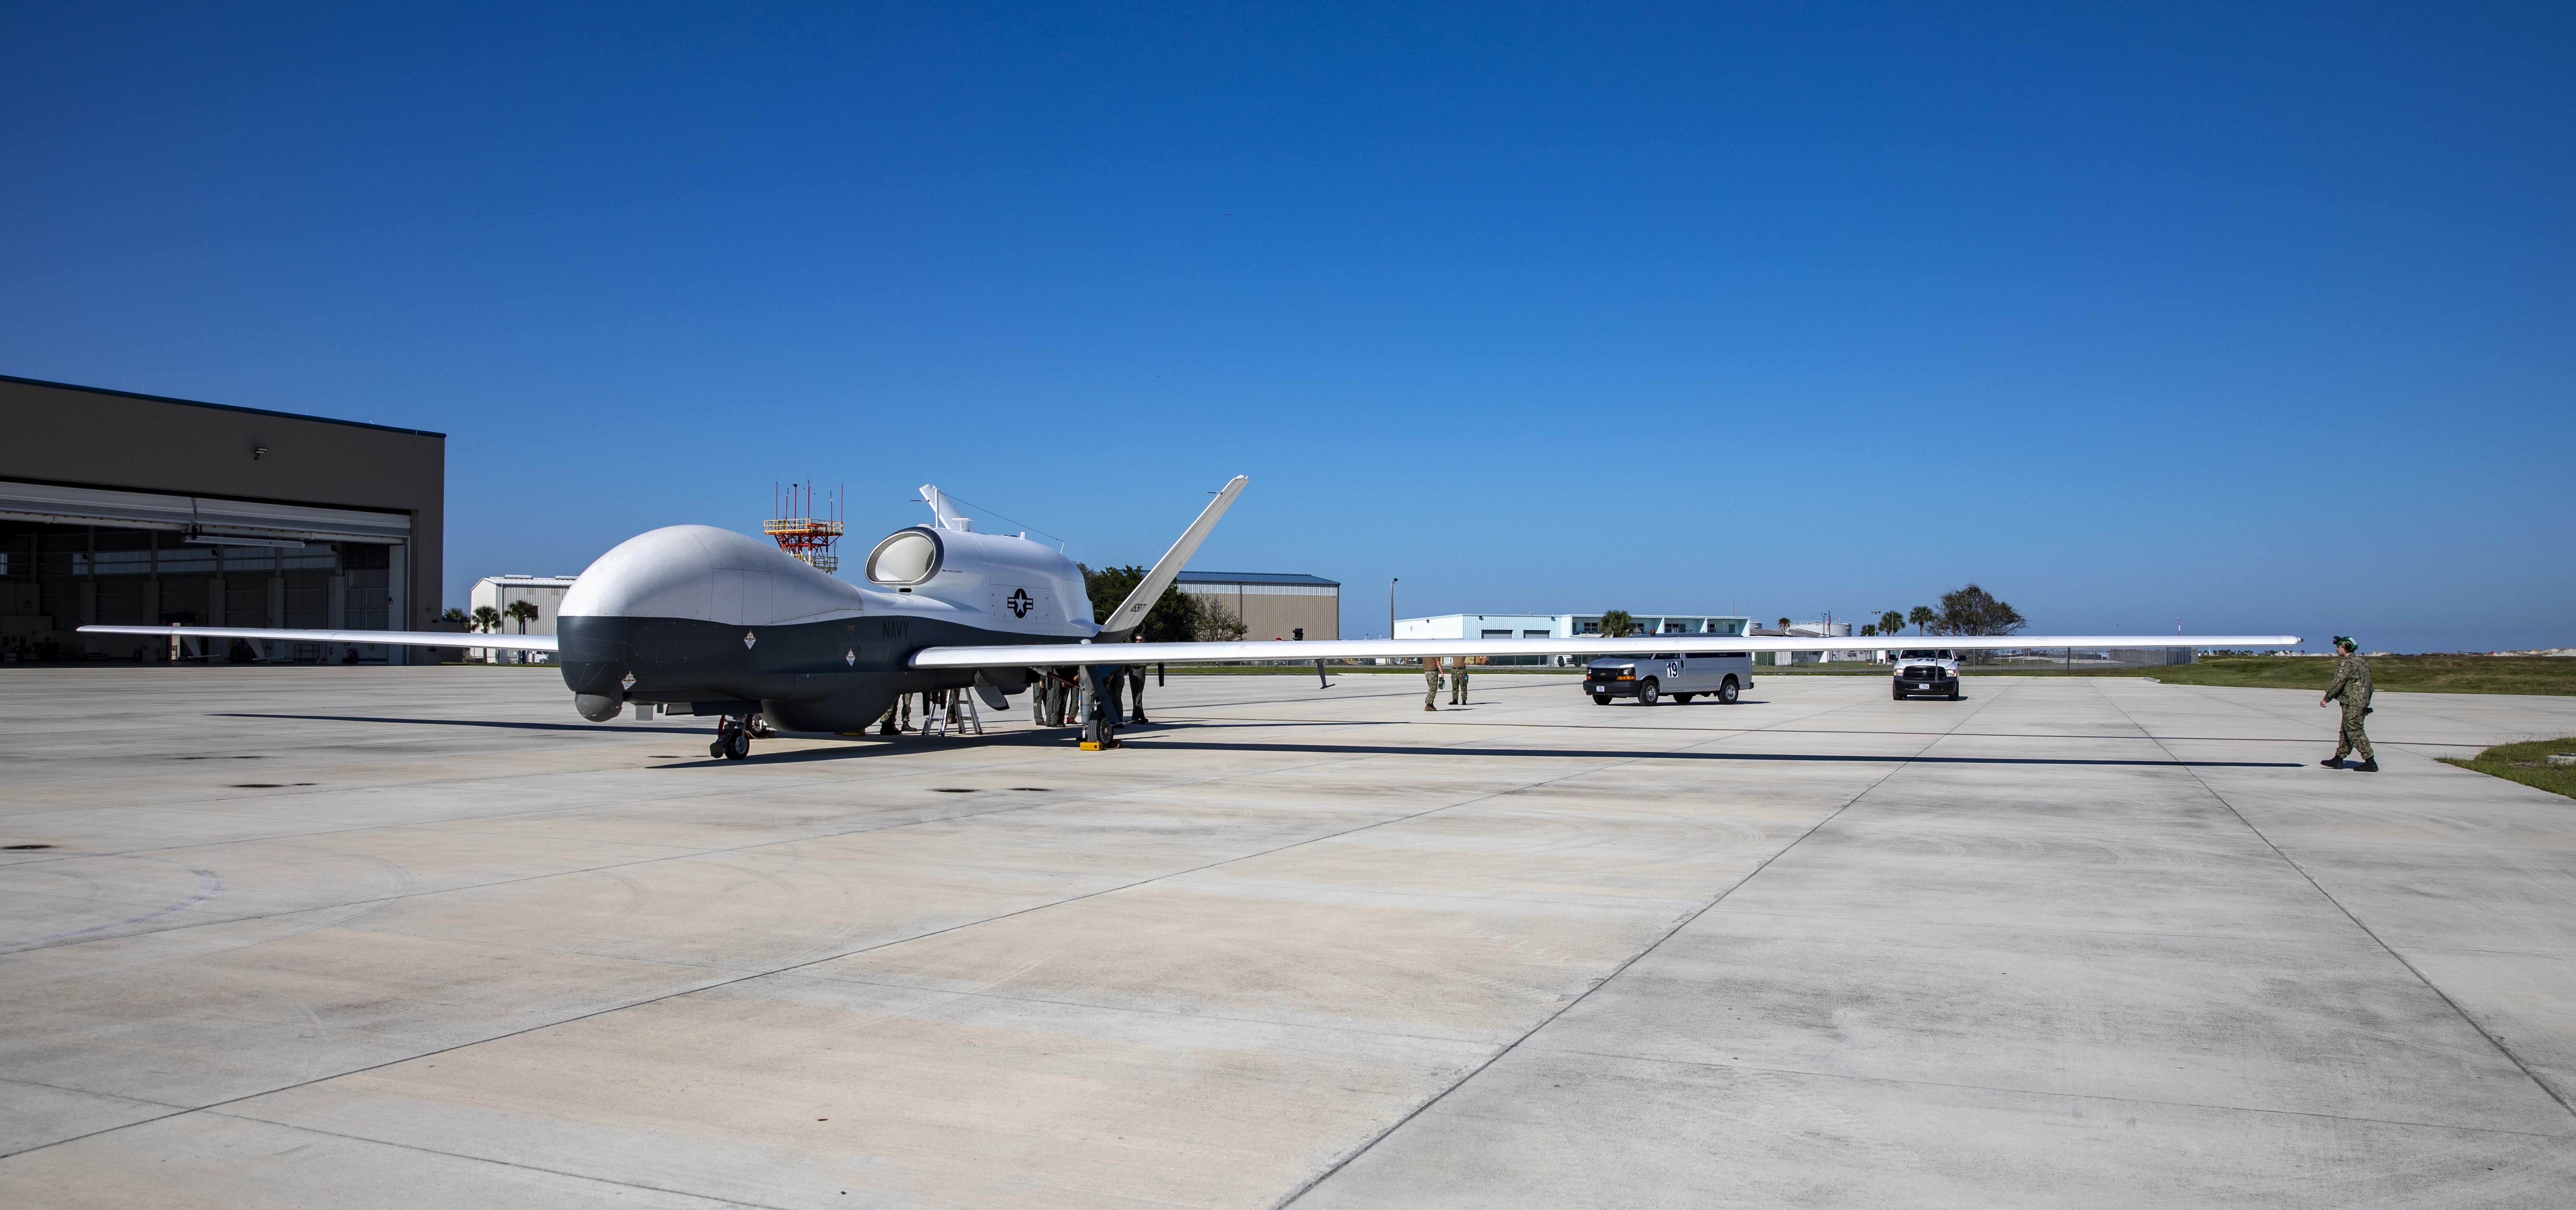 An MQ-4C Triton Unmanned Aircraft System (UAS) assigned to Unmanned Patrol Squadron 19 (VUP-19), lands at Naval Station Mayport, Florida, Oct. 14, 2022.